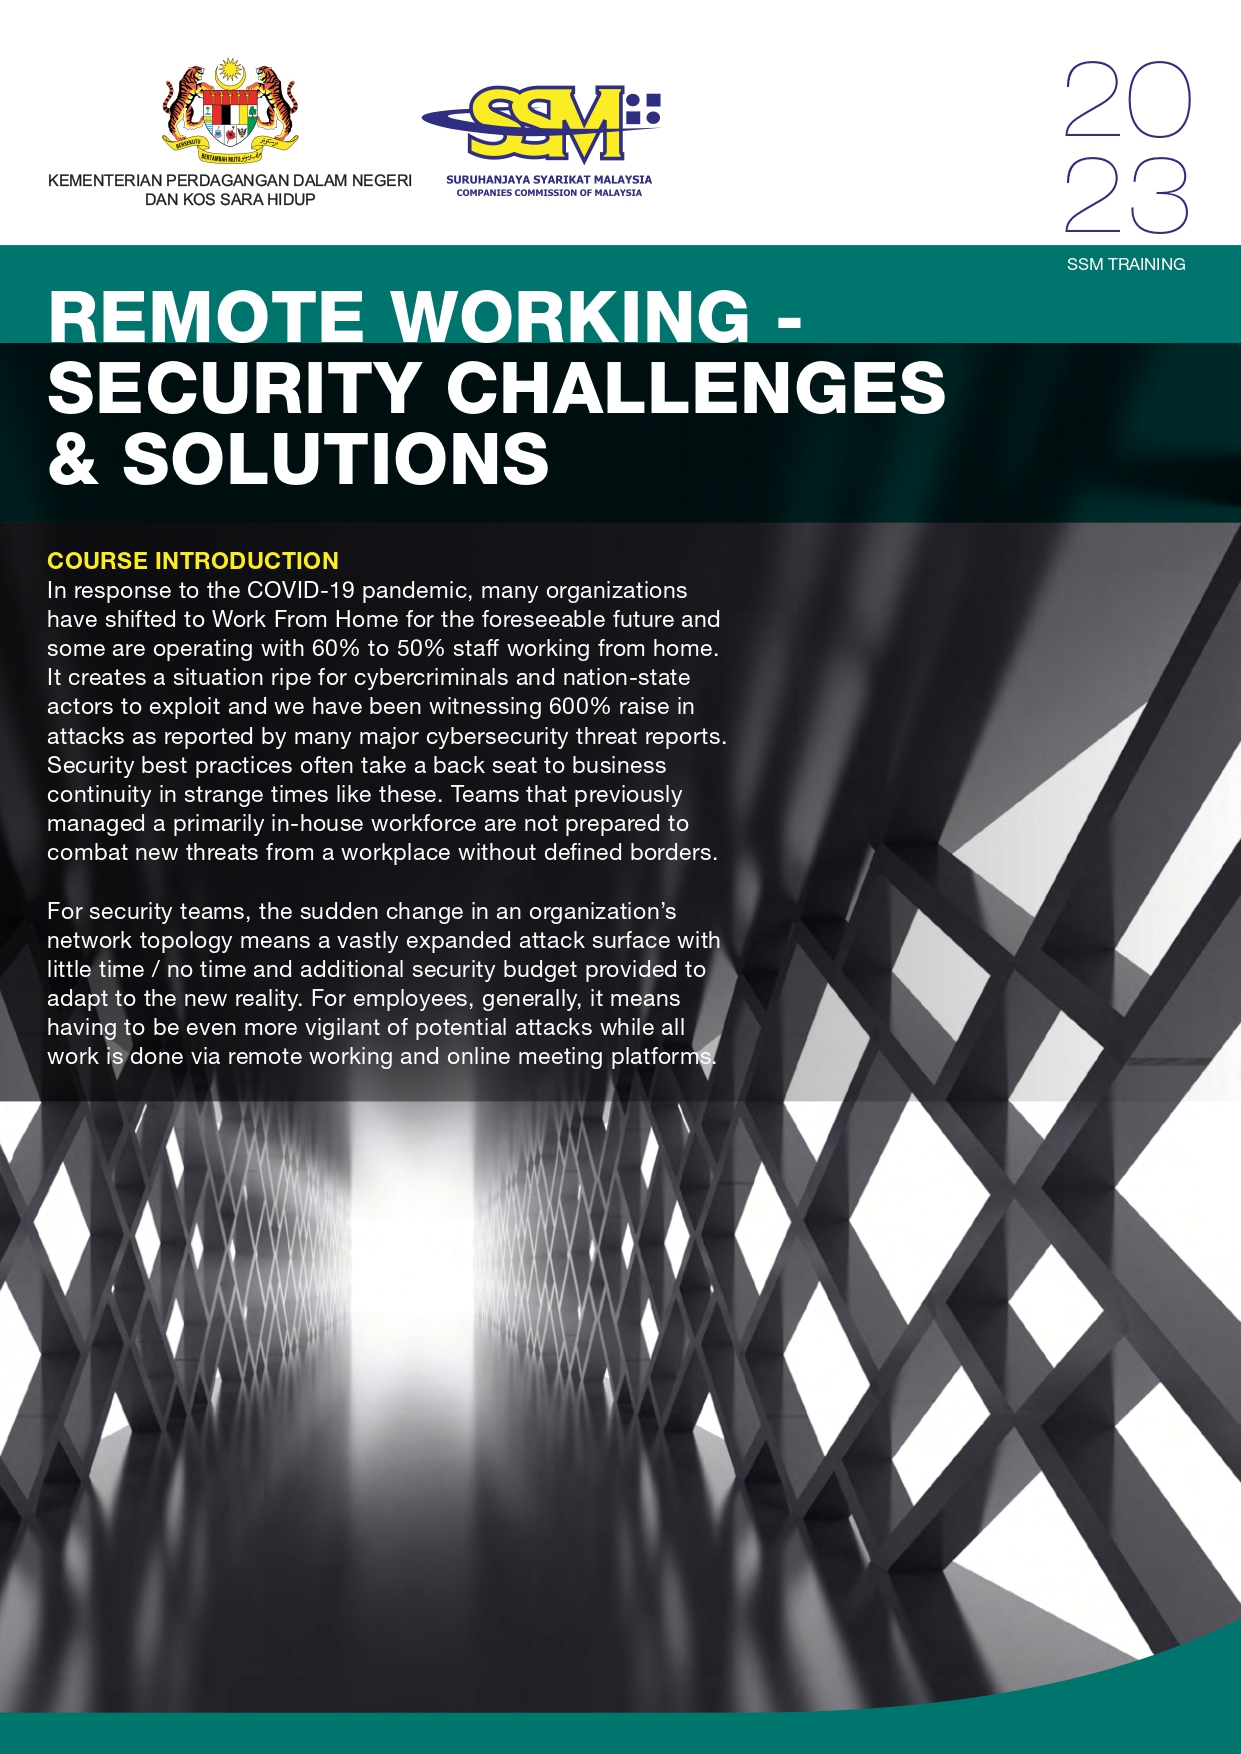 REMOTE WORKING - SECURITY CHALLENGES & SOLUTIONS.jpg